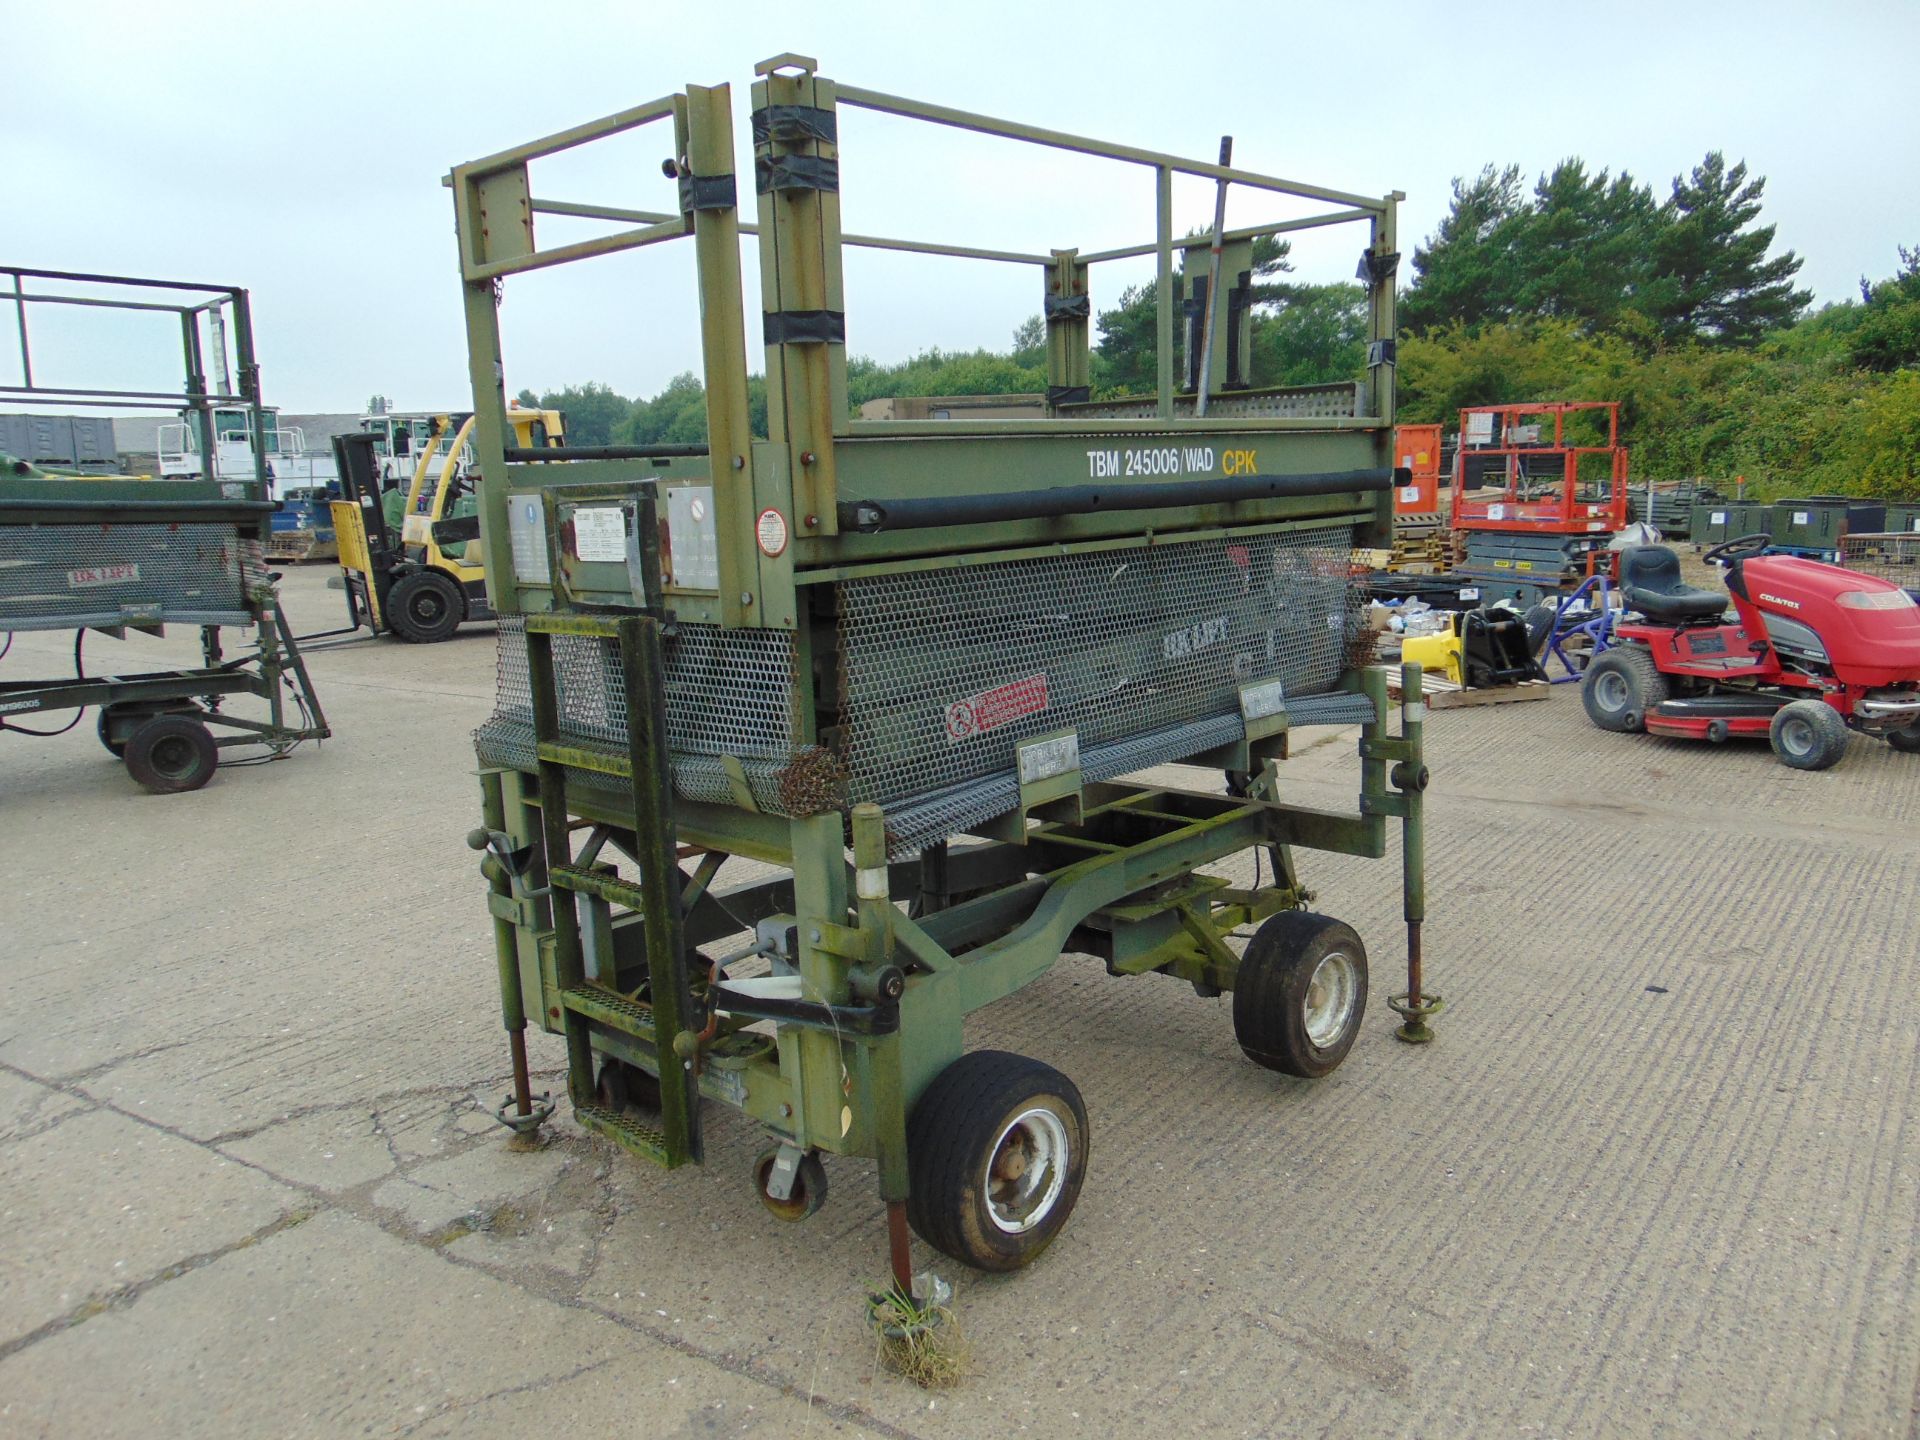 UK Lift Aircraft Hydraulic Access Platform from RAF as Shown - Image 4 of 13